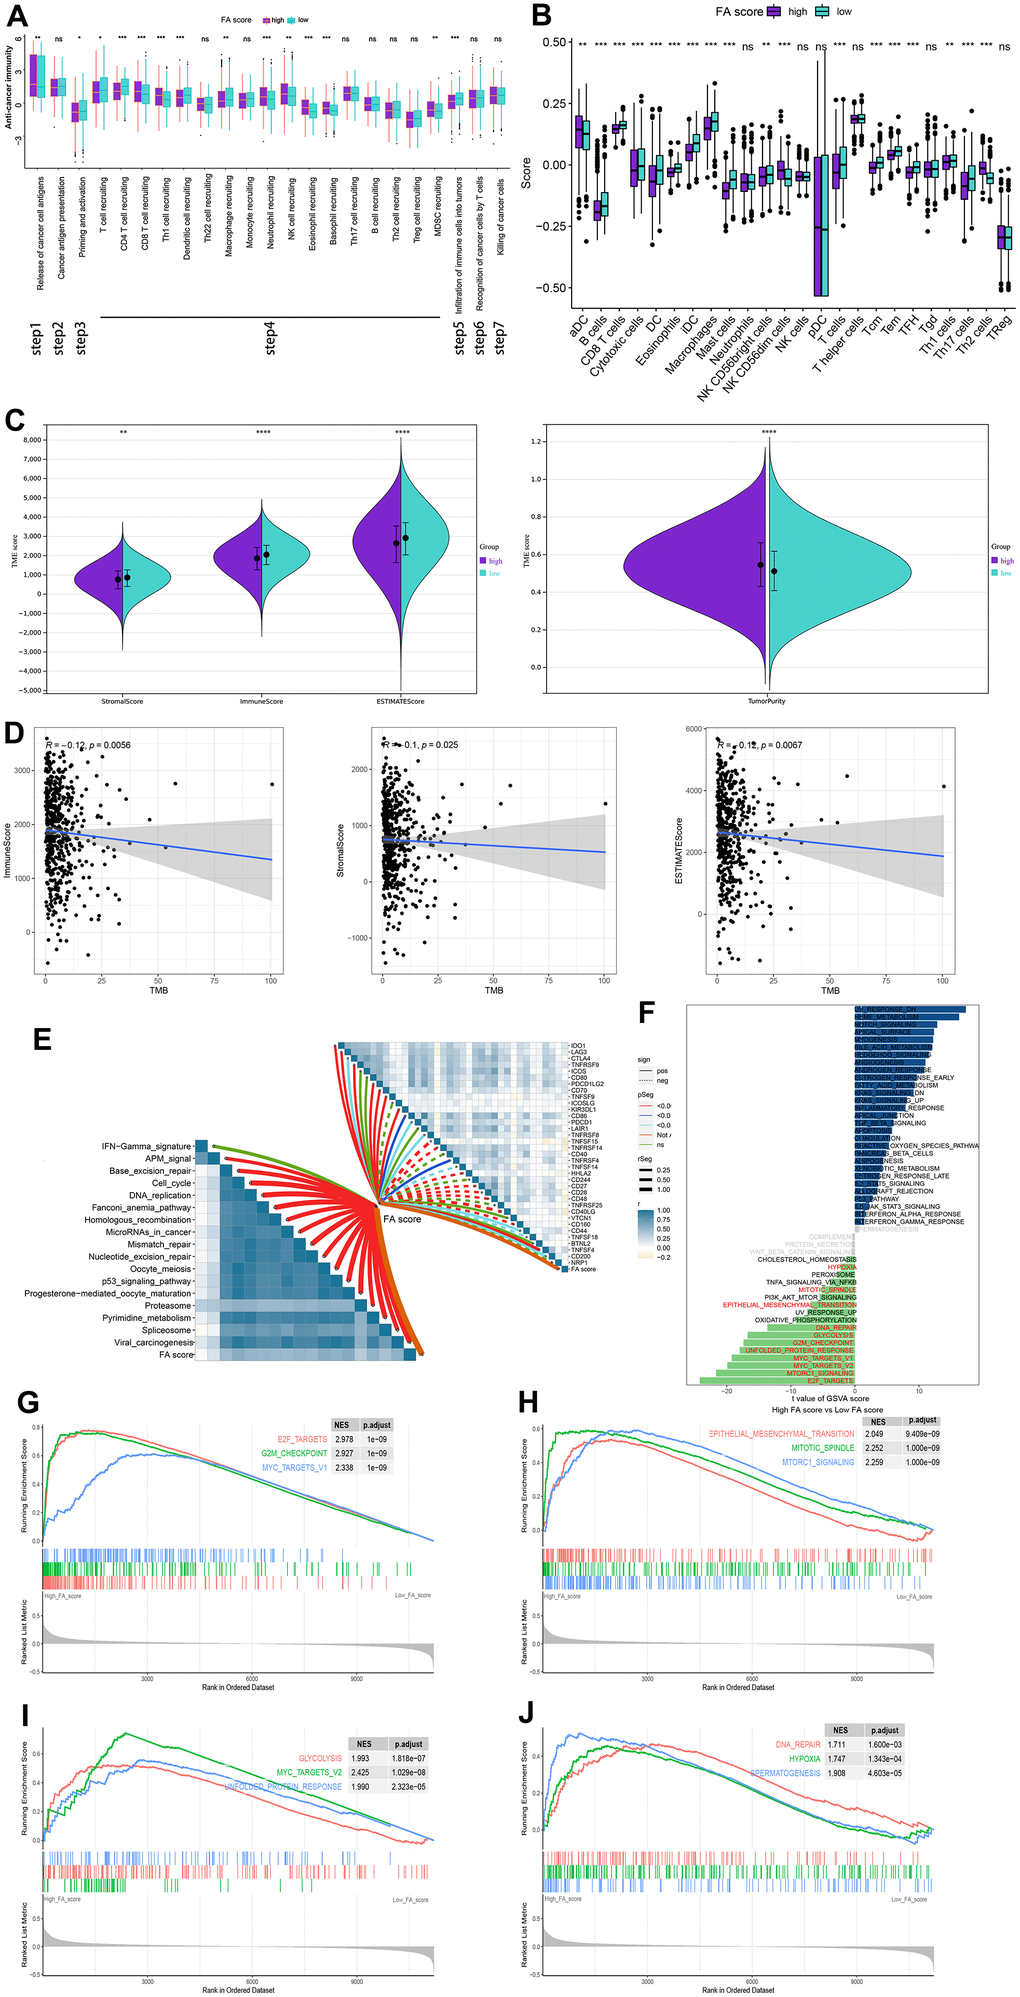 The relationship between immune characters of TME and FA score in the whole cohort. (A) Differences in activities of the cancer immunity cycles between high and low FA score groups. (B) Different expressions of immune infiltration cells in each FA score group. (C) Violin plots for the immune score, stromal score, ESTIMATE score, and tumor purity in the low and high FA score groups. (D) Spearman correlation analysis between TMB and immune score, stromal score, and ESTIMATE score. (E) The correlations between FA score, immunotherapy-predicted pathways and immune checkpoints. (F) The difference in the hallmark gene sets between FA score groups. (G–J) The GSEA results for the 11 overlapping upregulated hallmark pathways in terms of the high FA score groups. ns, not significant, *P 